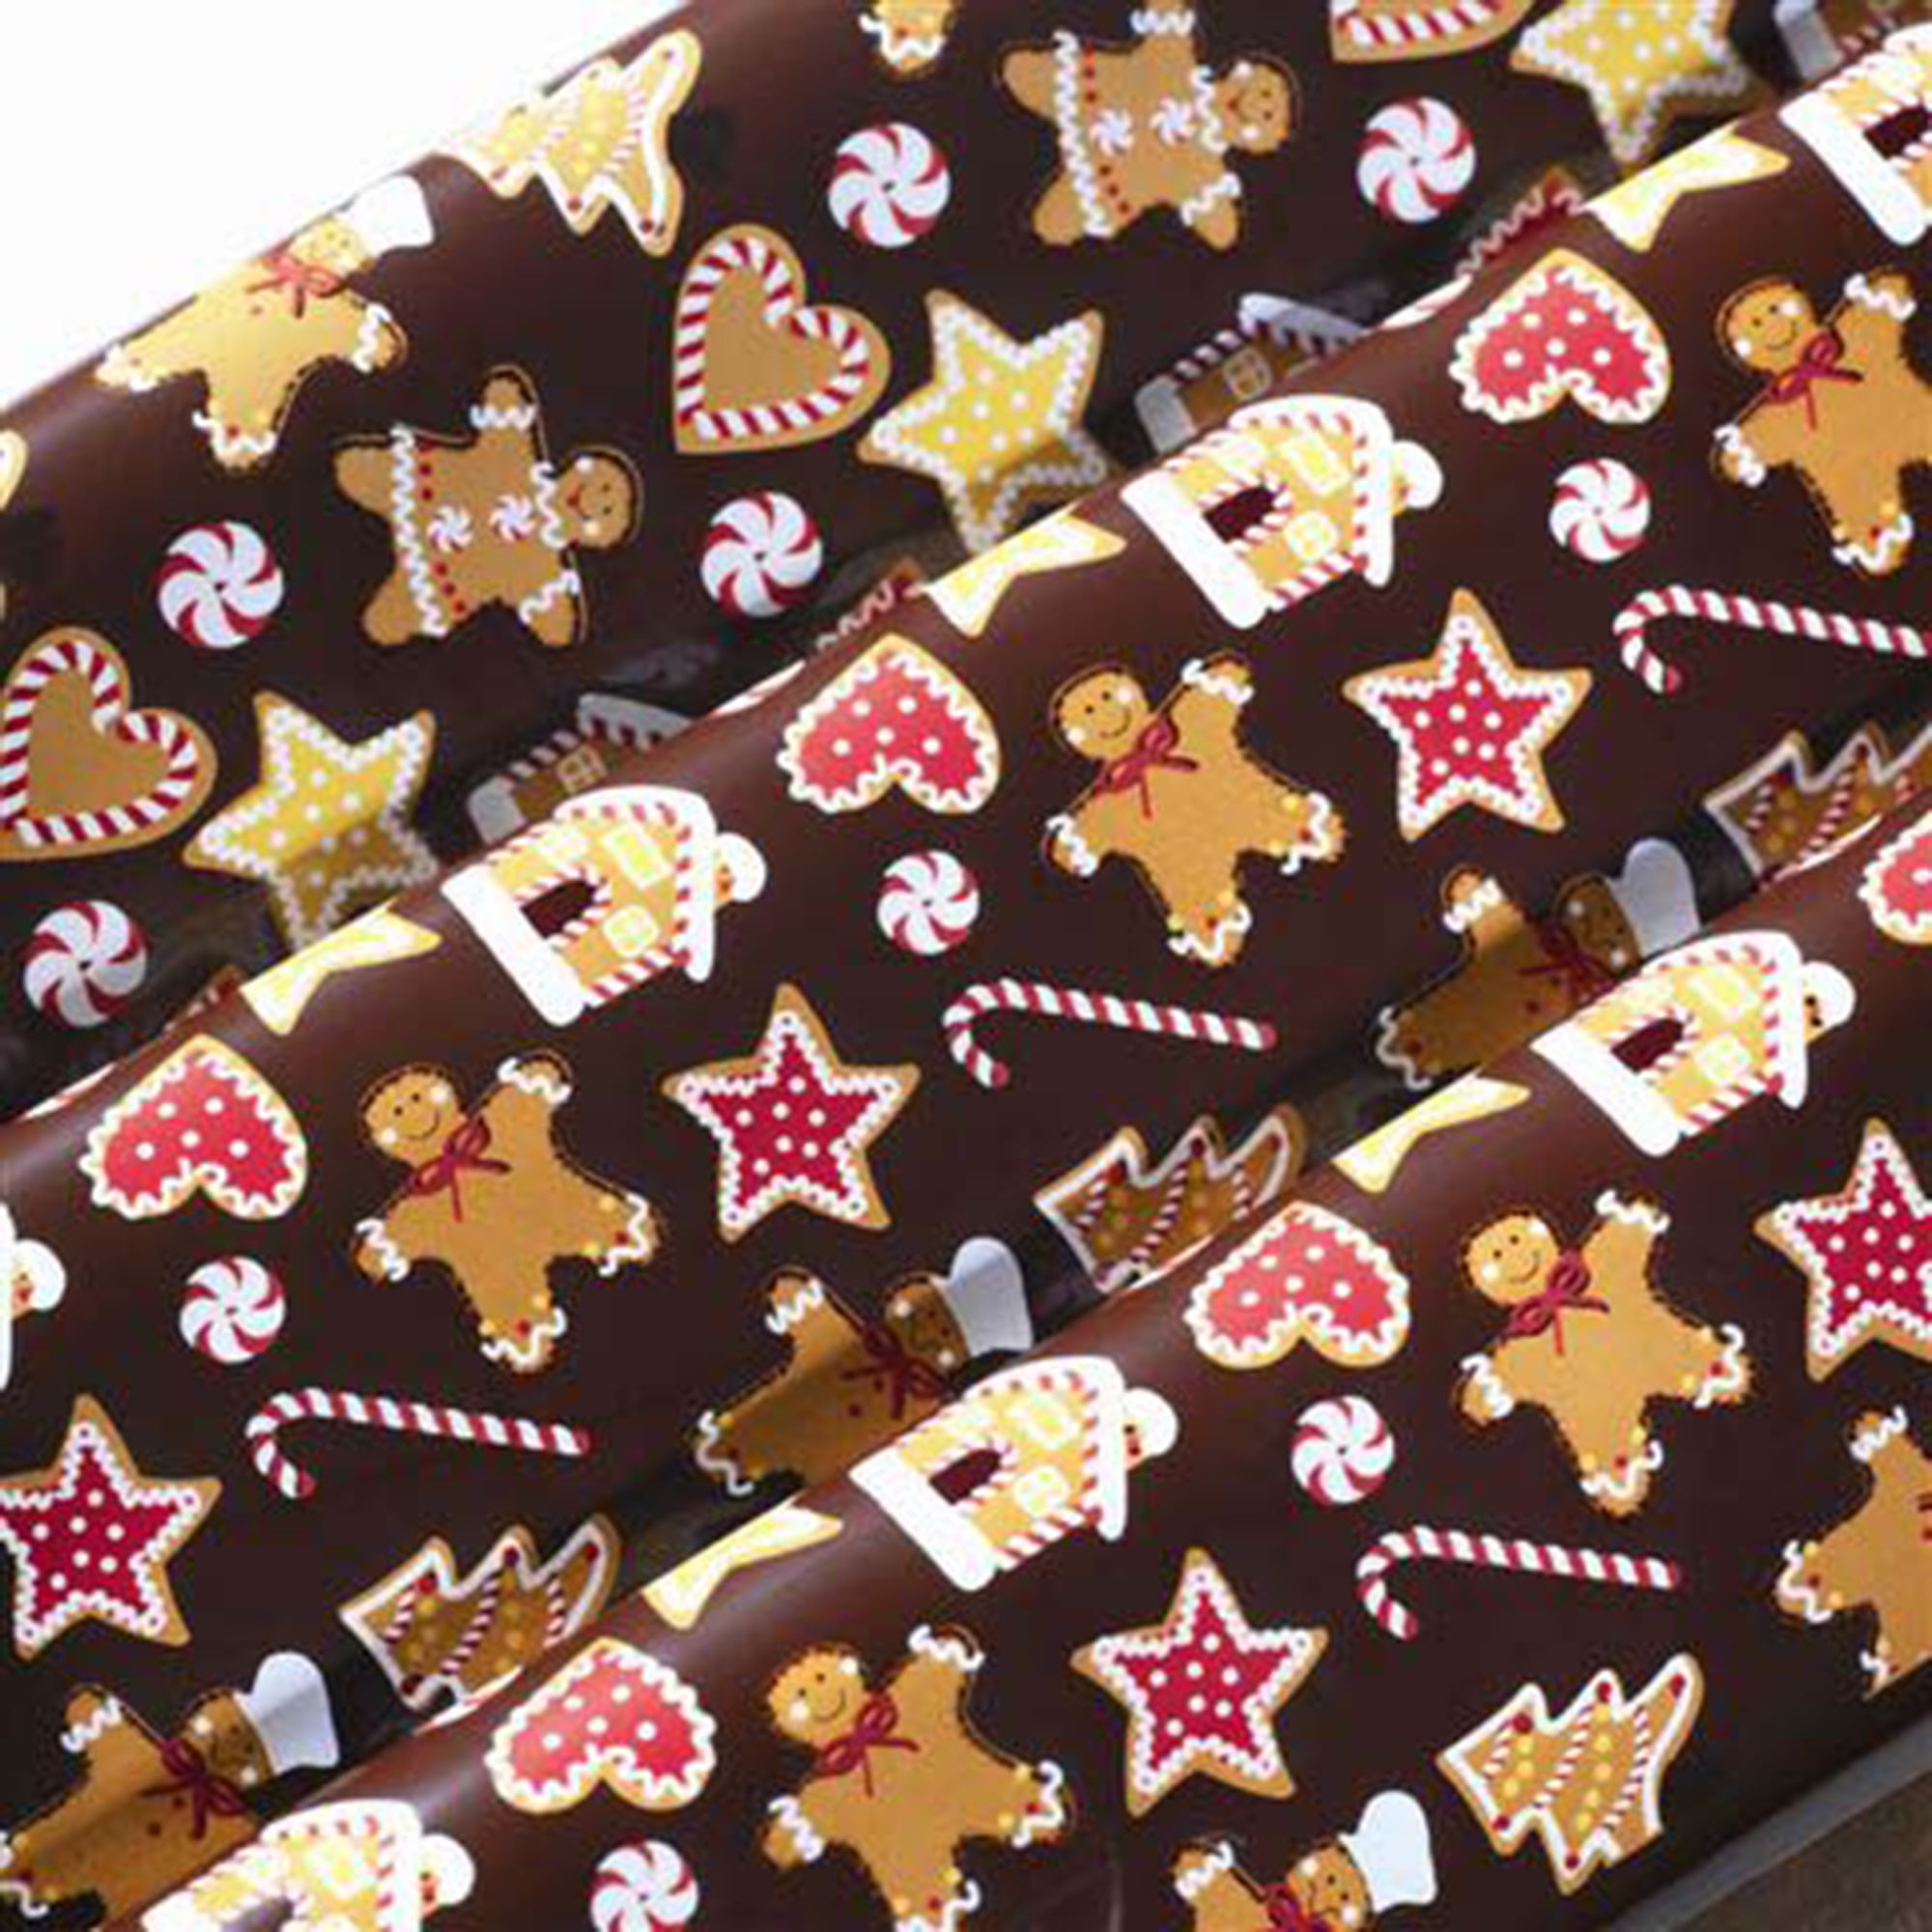 Chocolate Transfer Sheet: Gingerbread. 15 Sheets per pack. Size